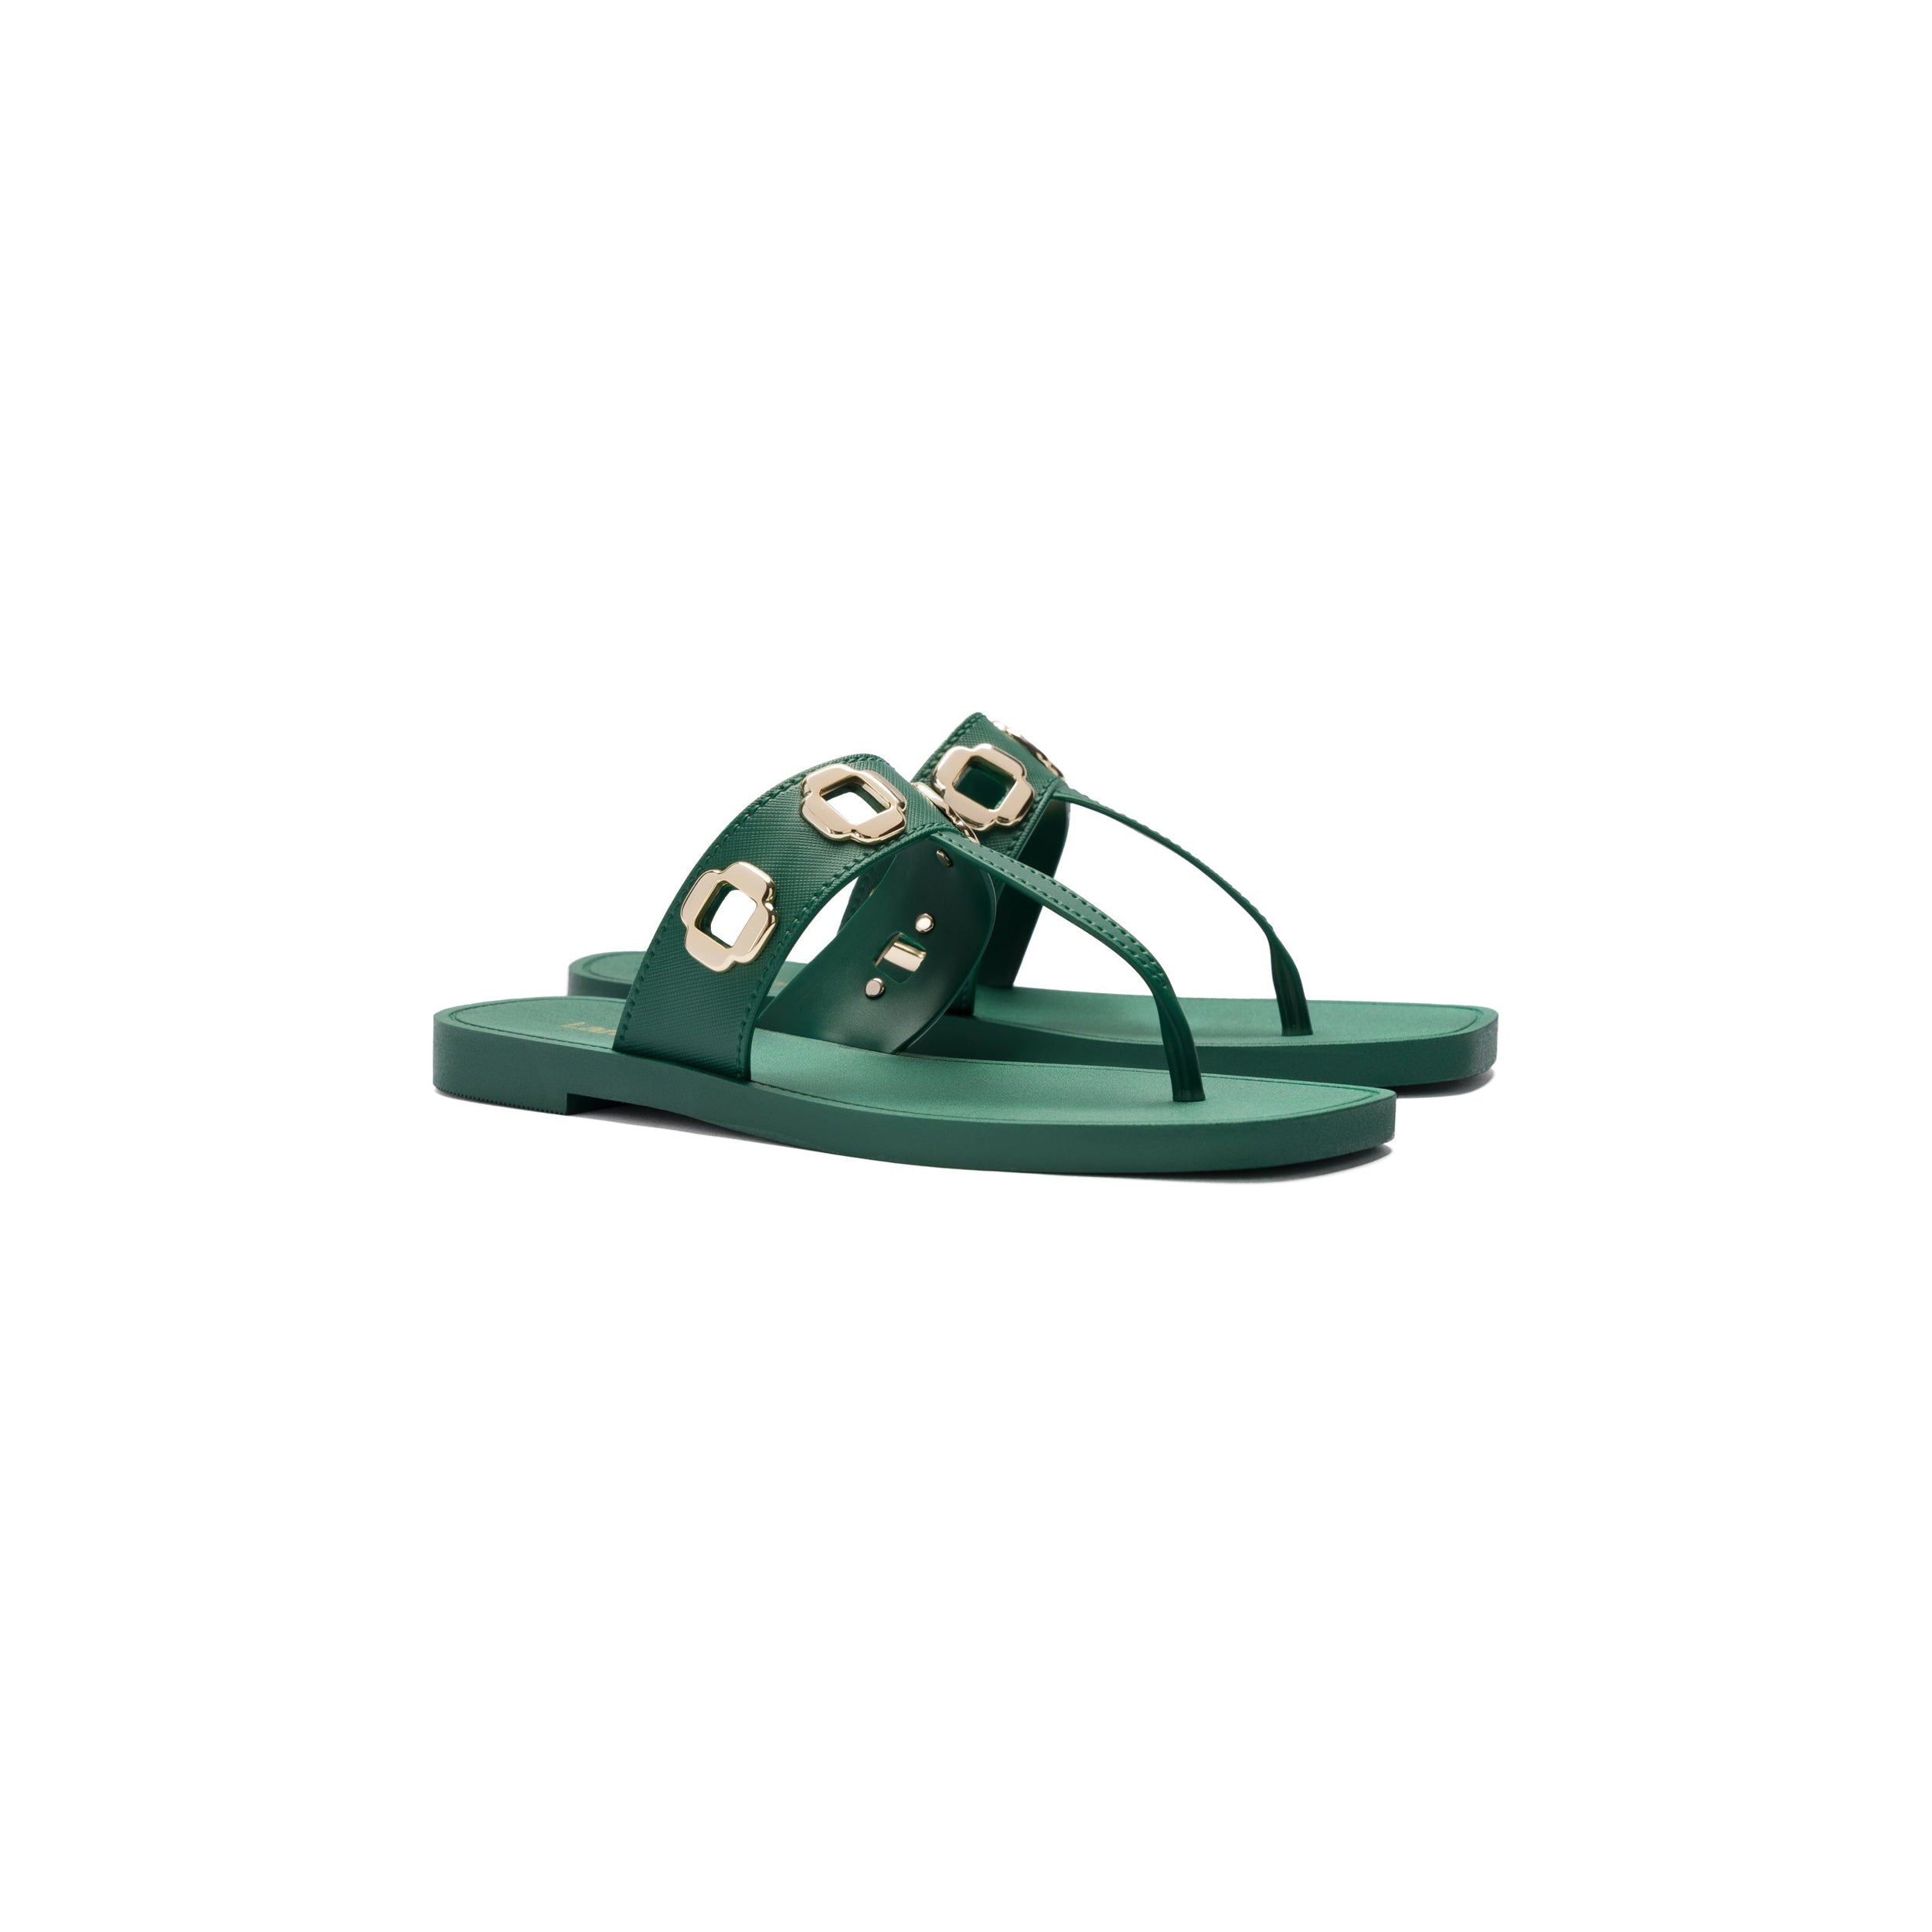 The Milan S In Emerald PVC sandals are a pair of stylish green shoes featuring a flat sole and backless design. These Larroudé bestsellers are adorned with golden hexagonal studs on the t-strap, providing both security and a decorative touch. The thong-style strap runs between the toes.